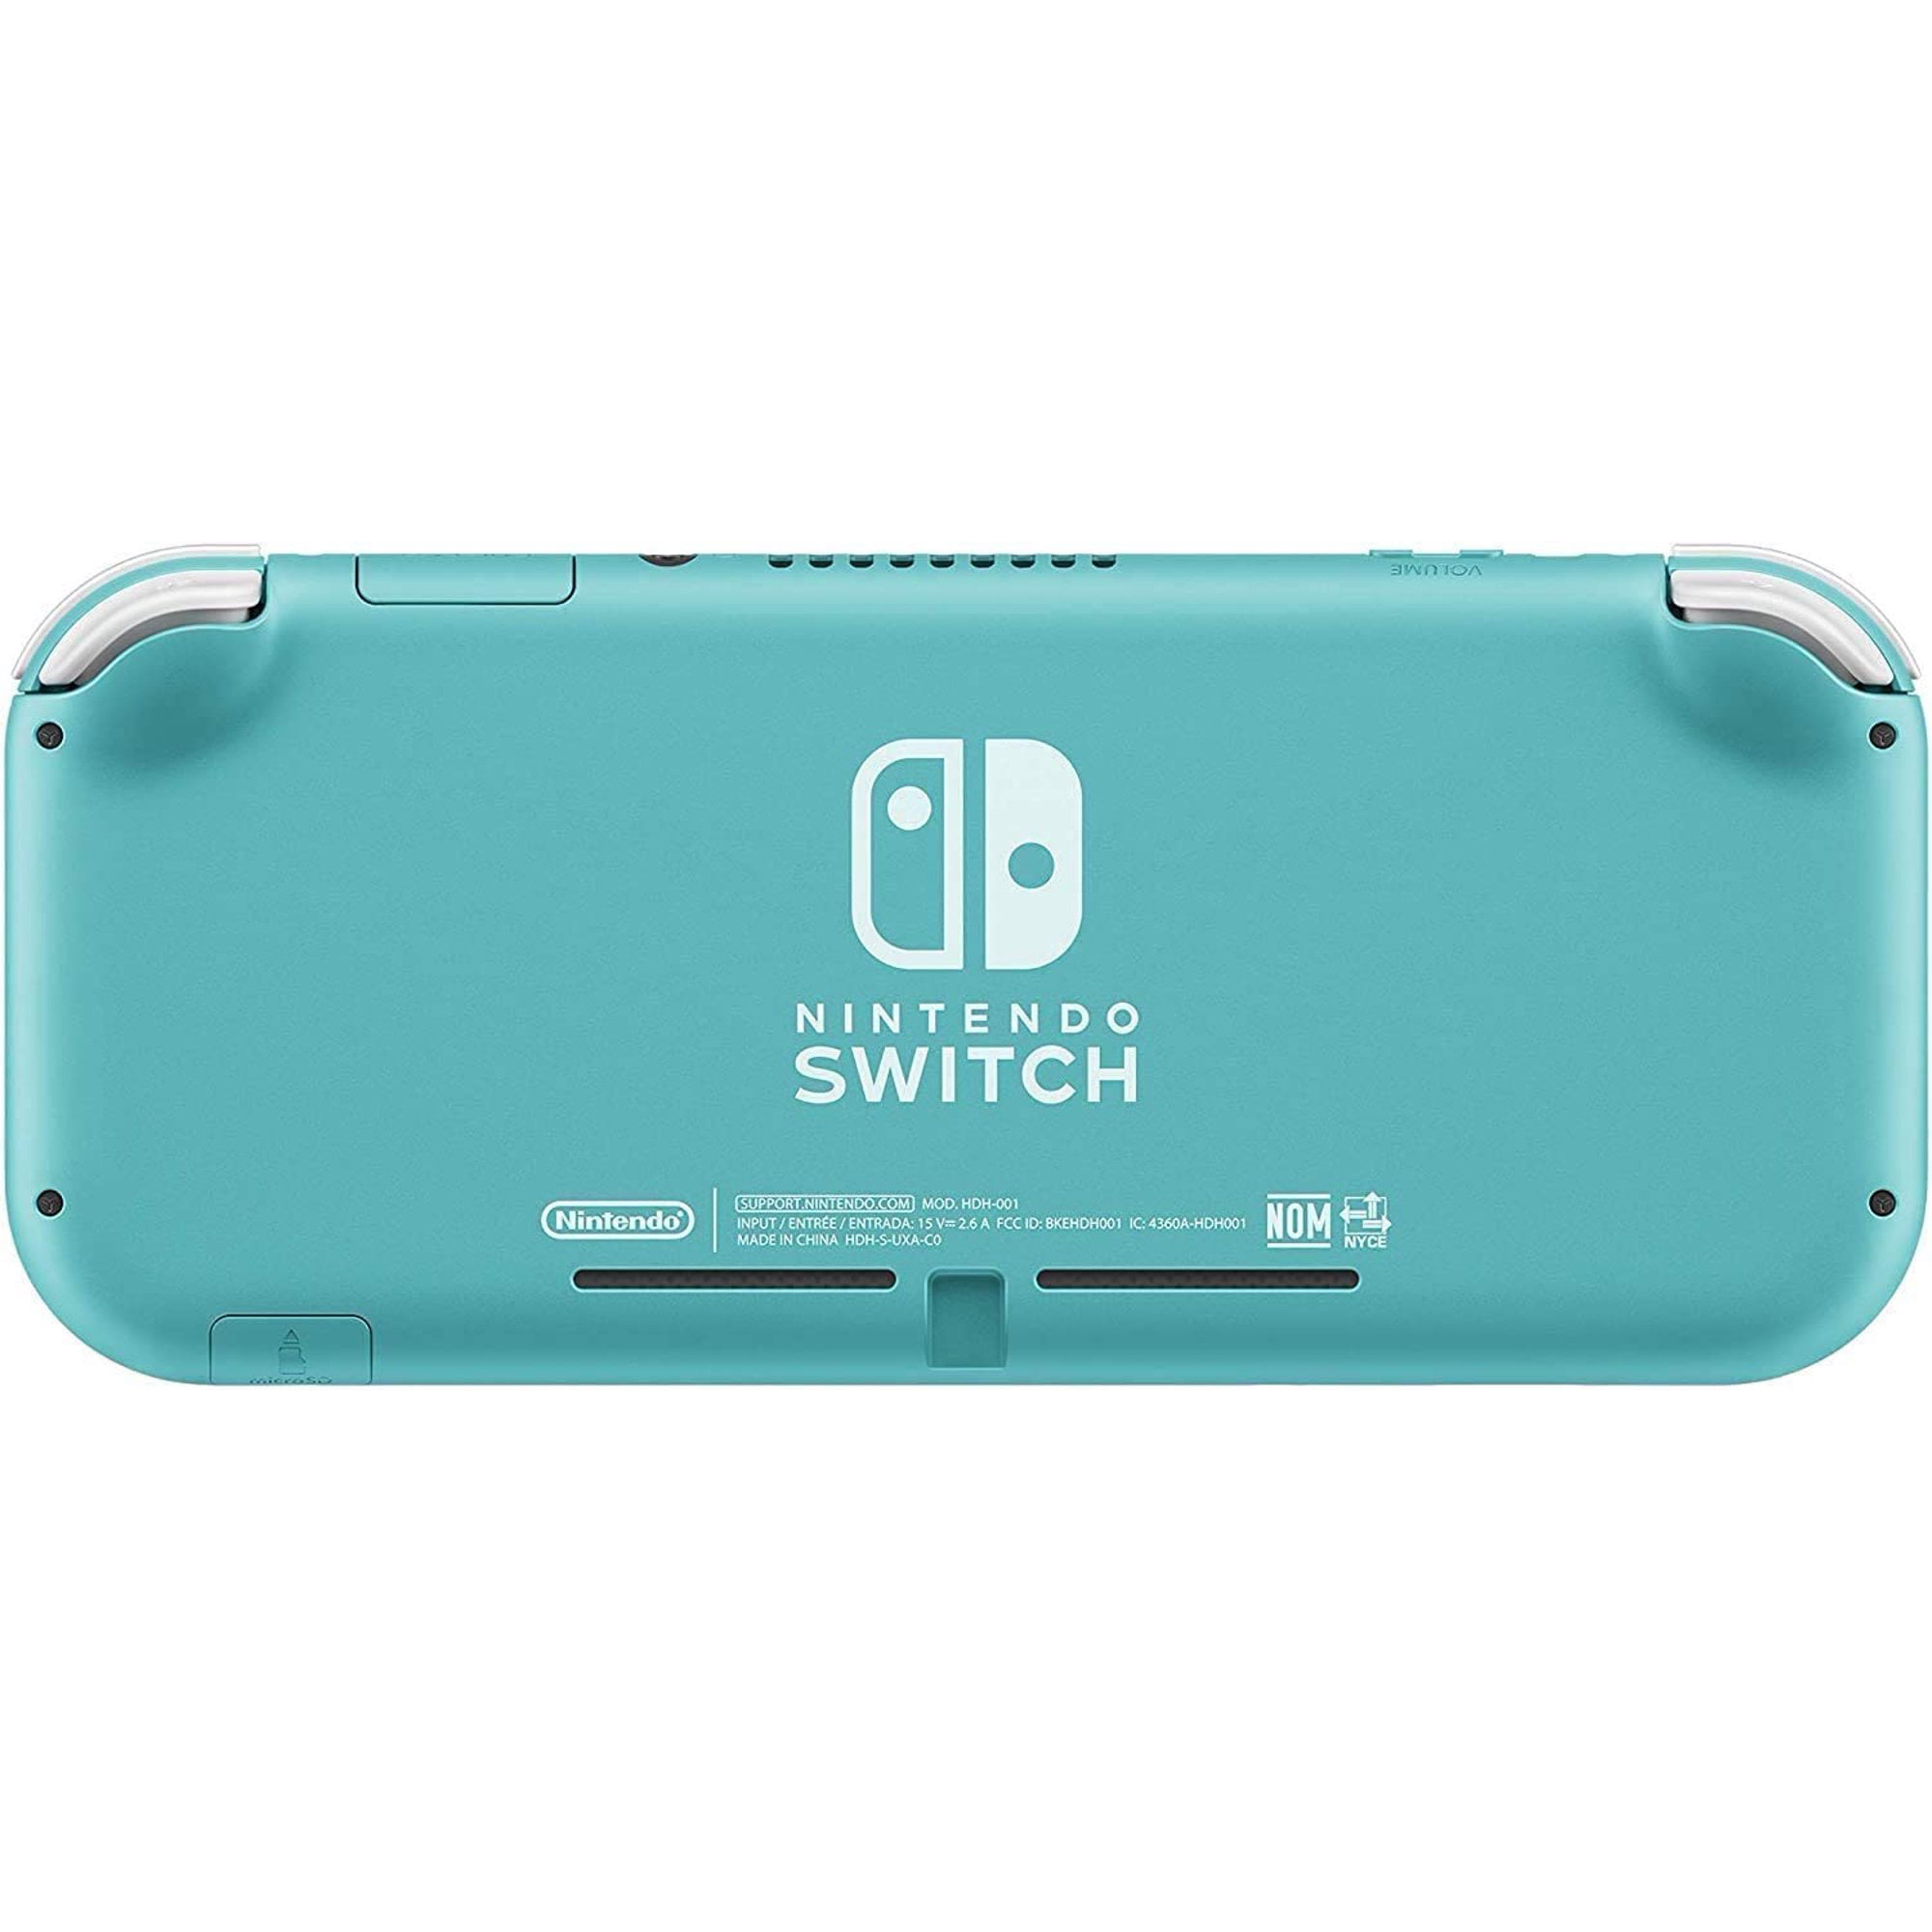 Newest Nintendo Switch Lite Game Console, Turquoise Blue, 5.5” Touchscreen,  Built-in Plus Control Pad, Mazepoly 128GB Memory Card with Adapter, 